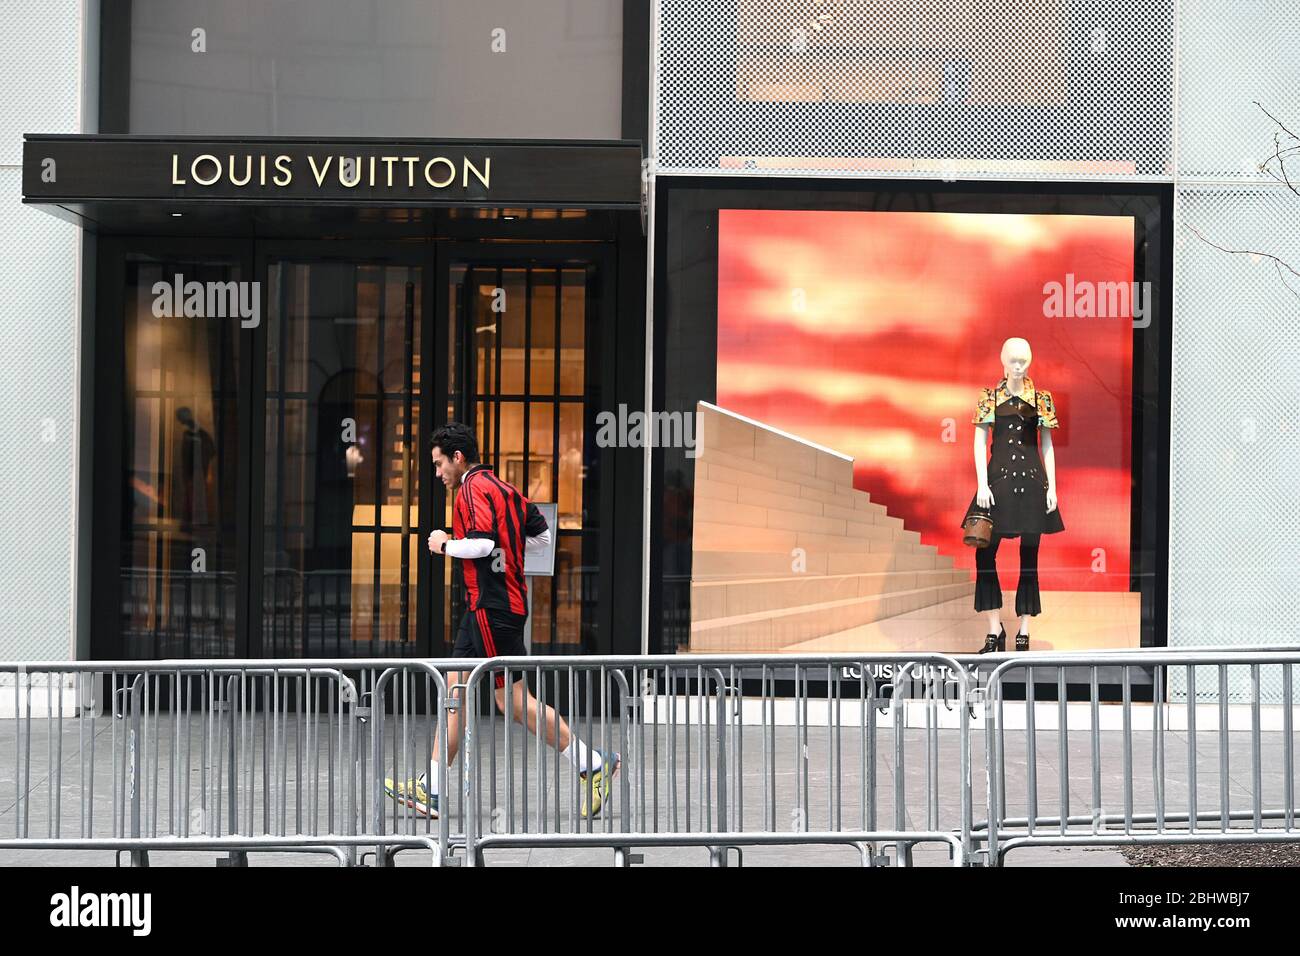 Will Louis Vuitton Temporarily Relocate Its Fifth Avenue Flagship